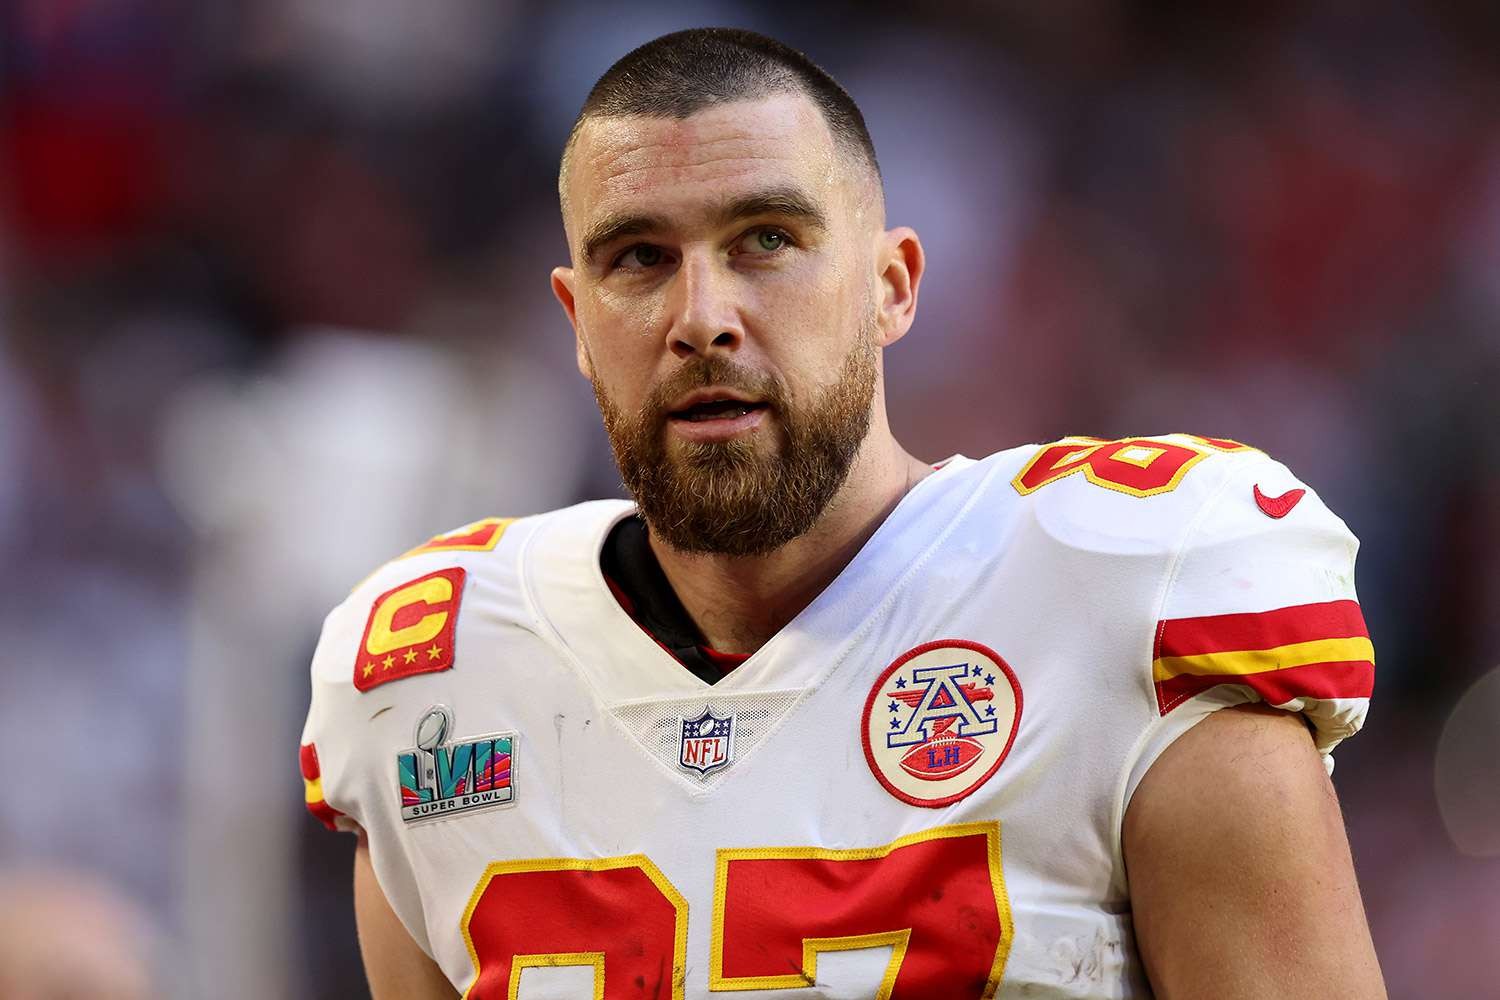 Jason Avant is happy with what Travis kelce has achieved professionally and in his romantic life